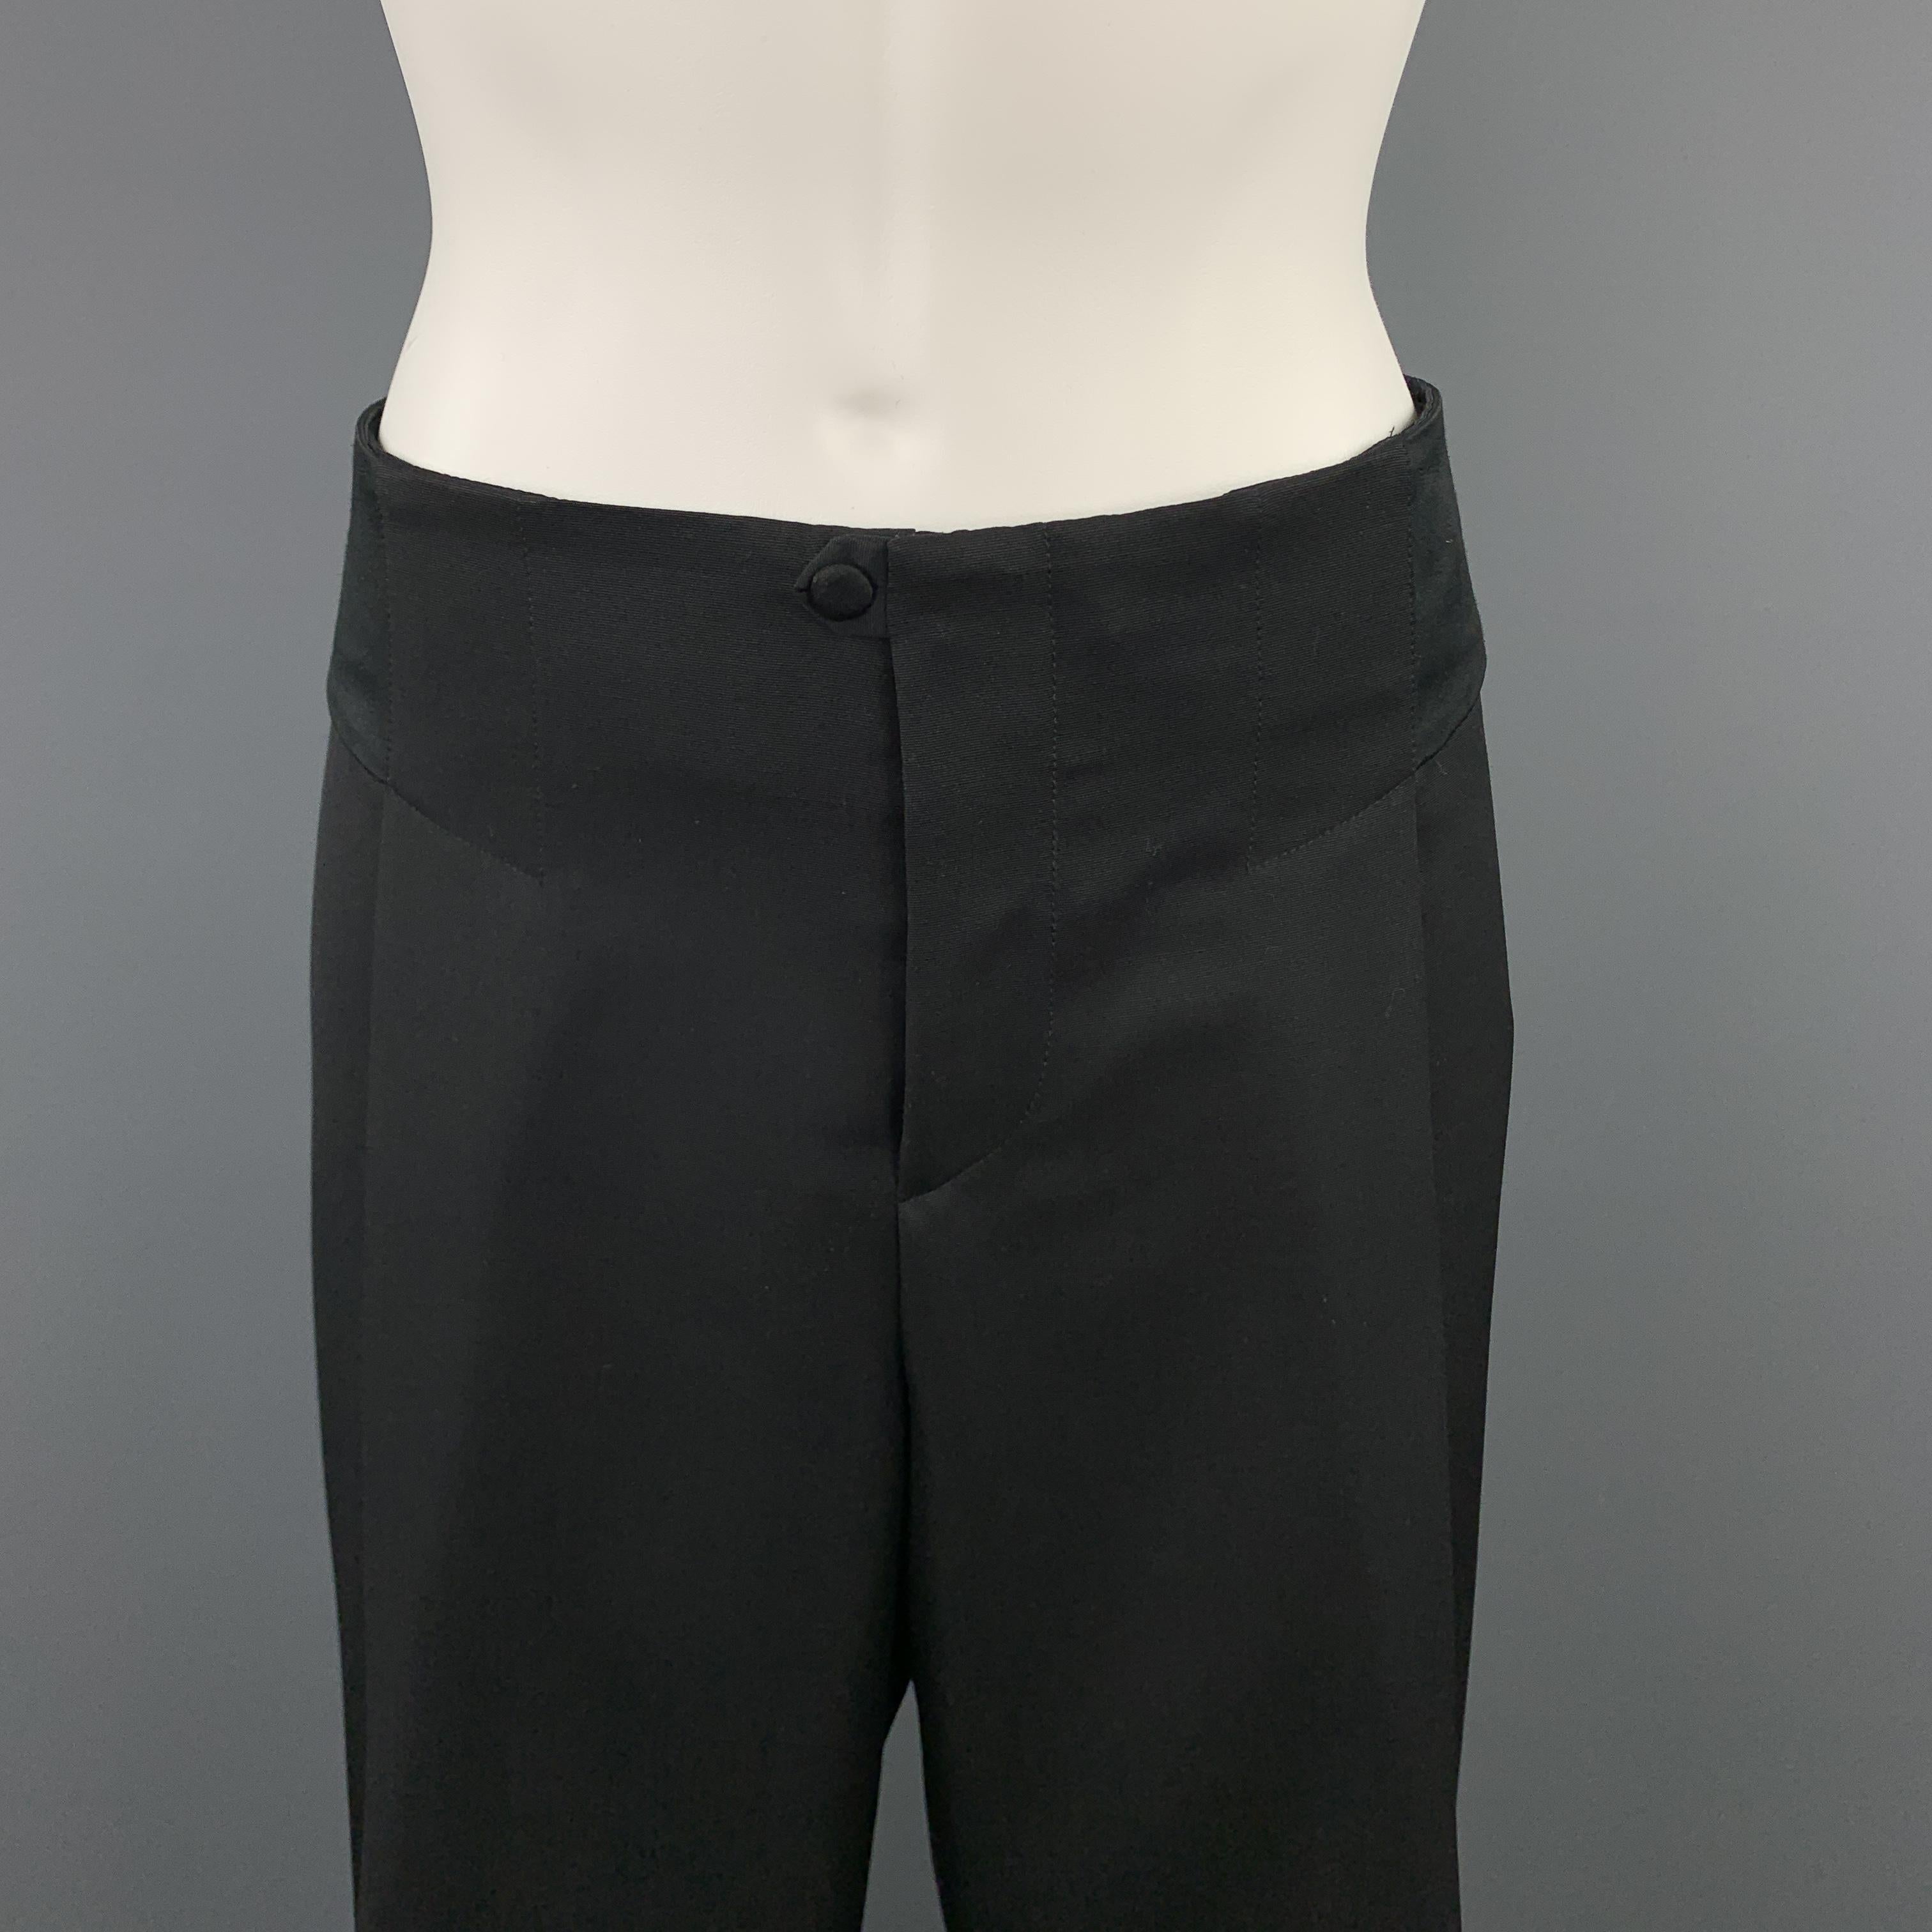 Archive GUCCI dress pants come in black wool with a single pleat wide leg, satin waistband side panels, and elastic closure at back. Elastic is a little stretched. As-is. Made in Italy.

Excellent Pre-Owned Condition.
Marked: IT